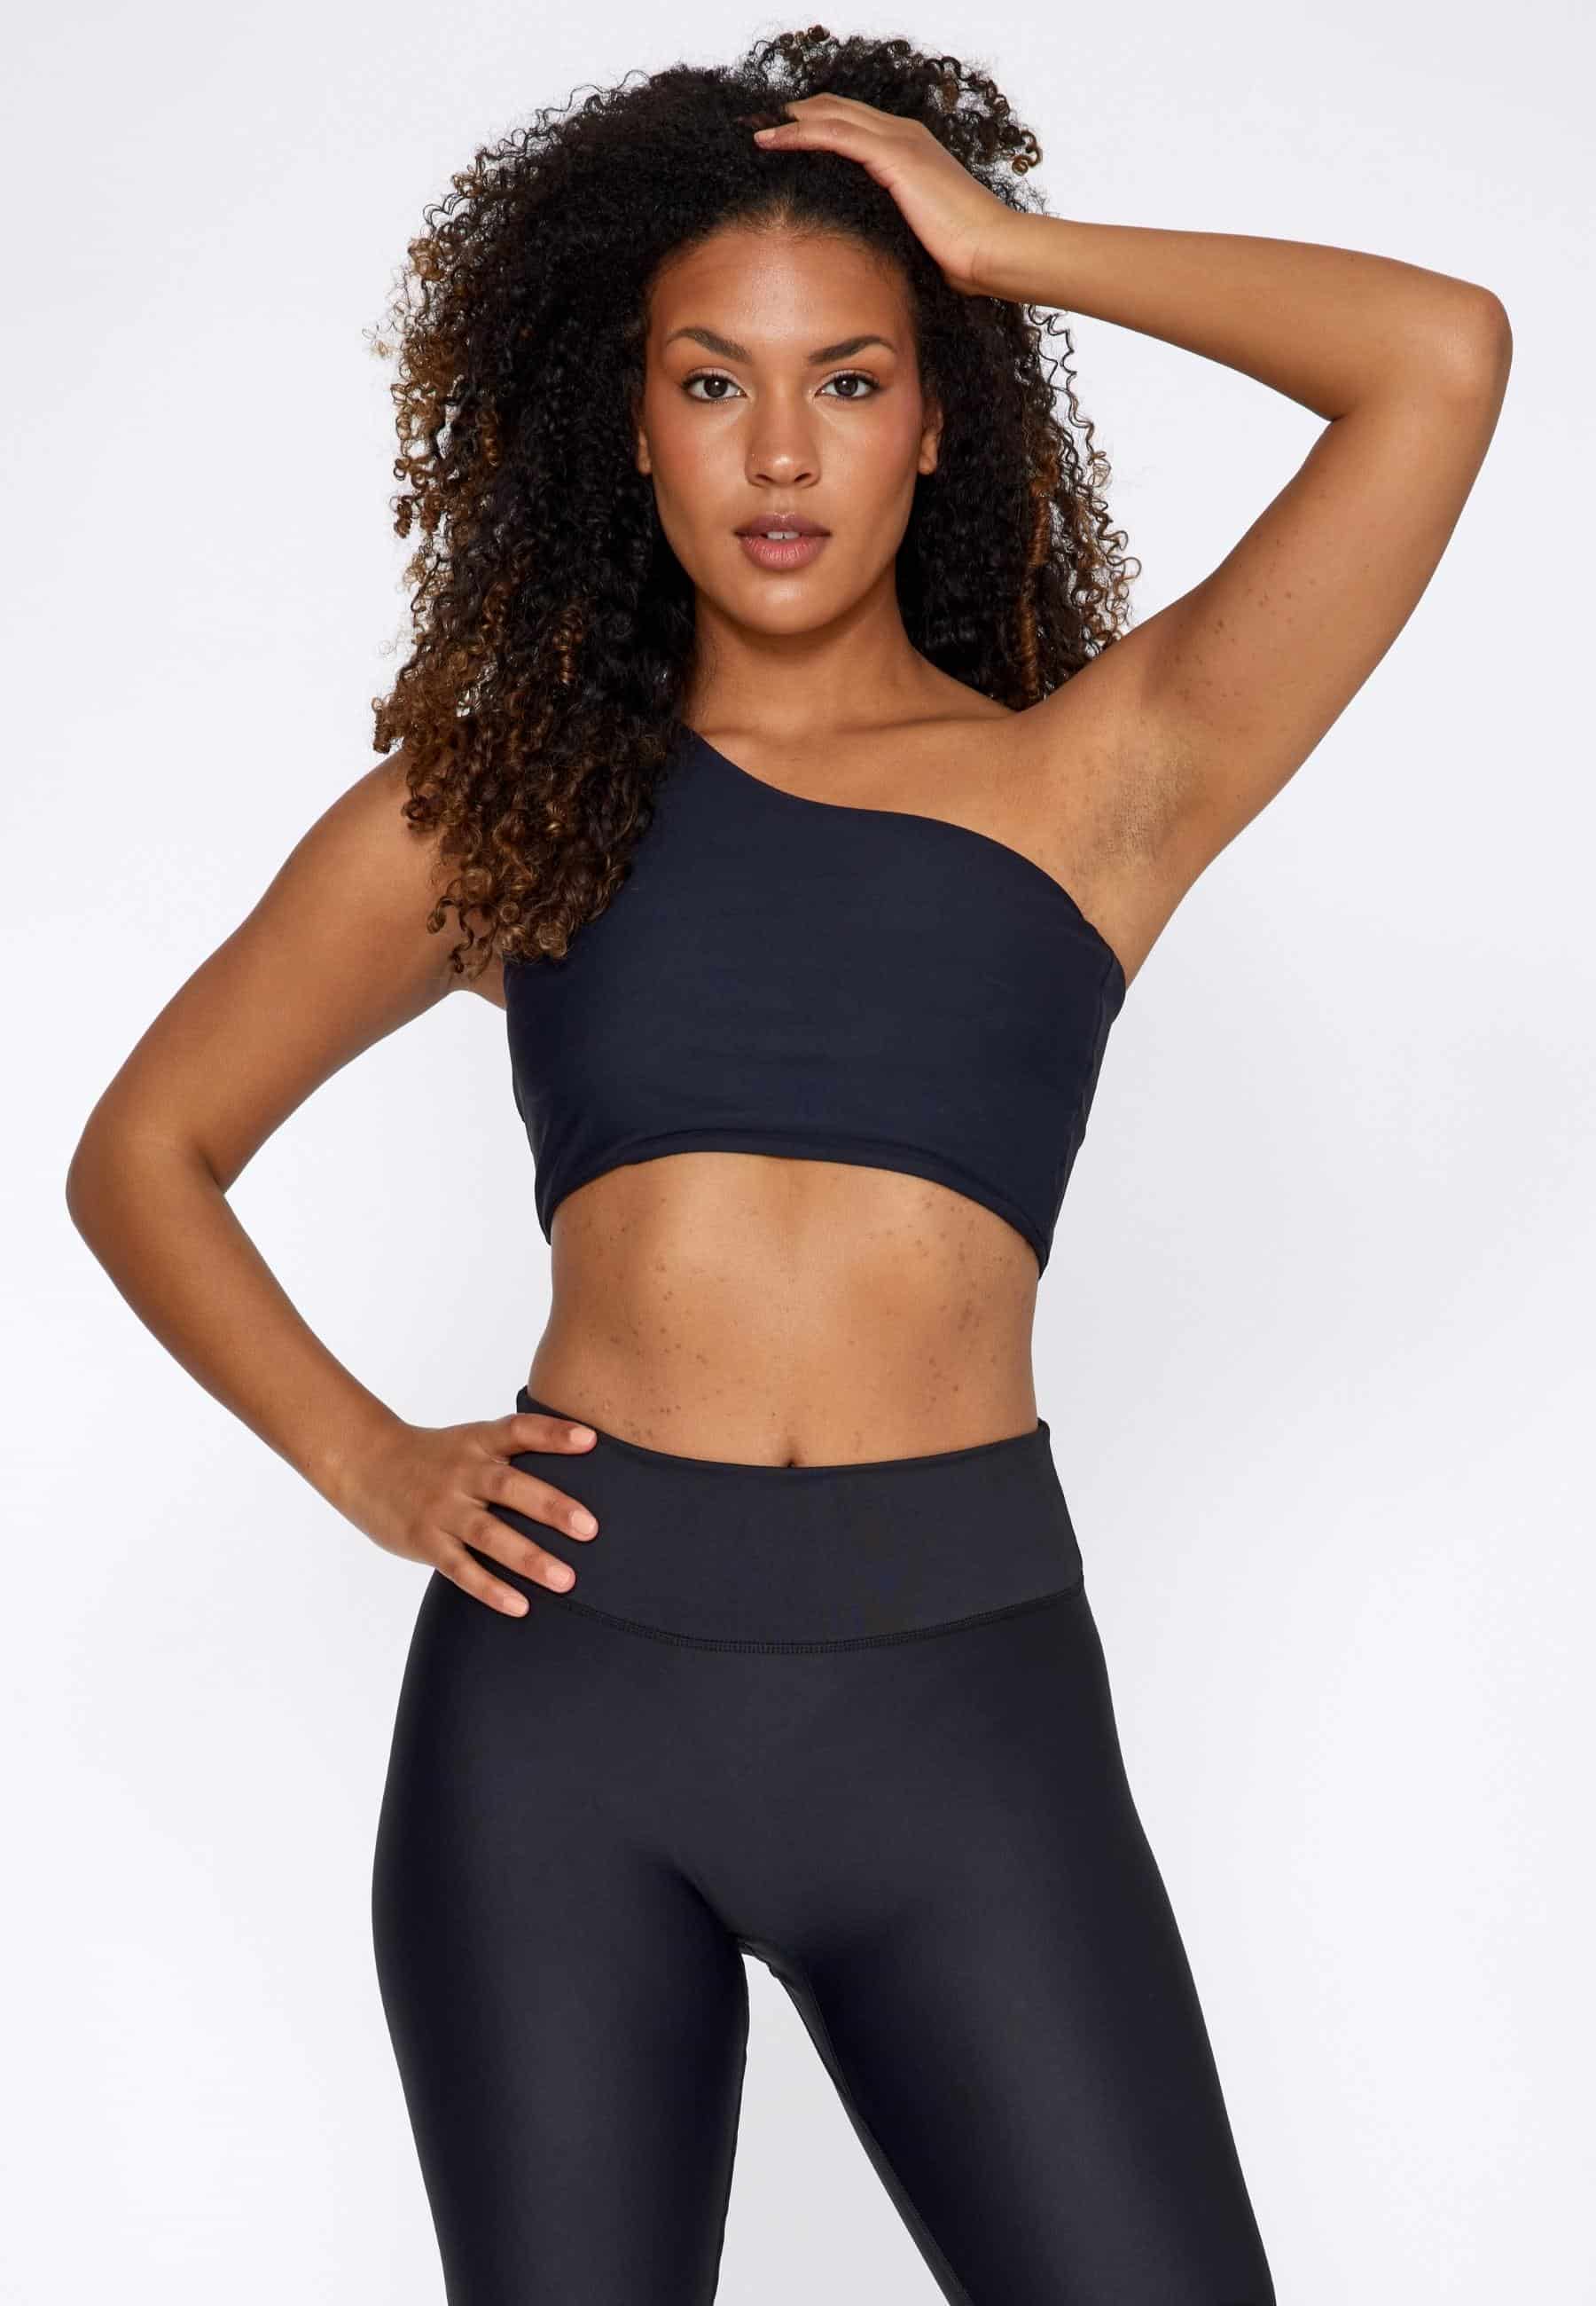 Sisterly Tribe - One Shoulder Top Black. One Shoulder design, Light to medium support, Buttery Soft & light, matte fabric.